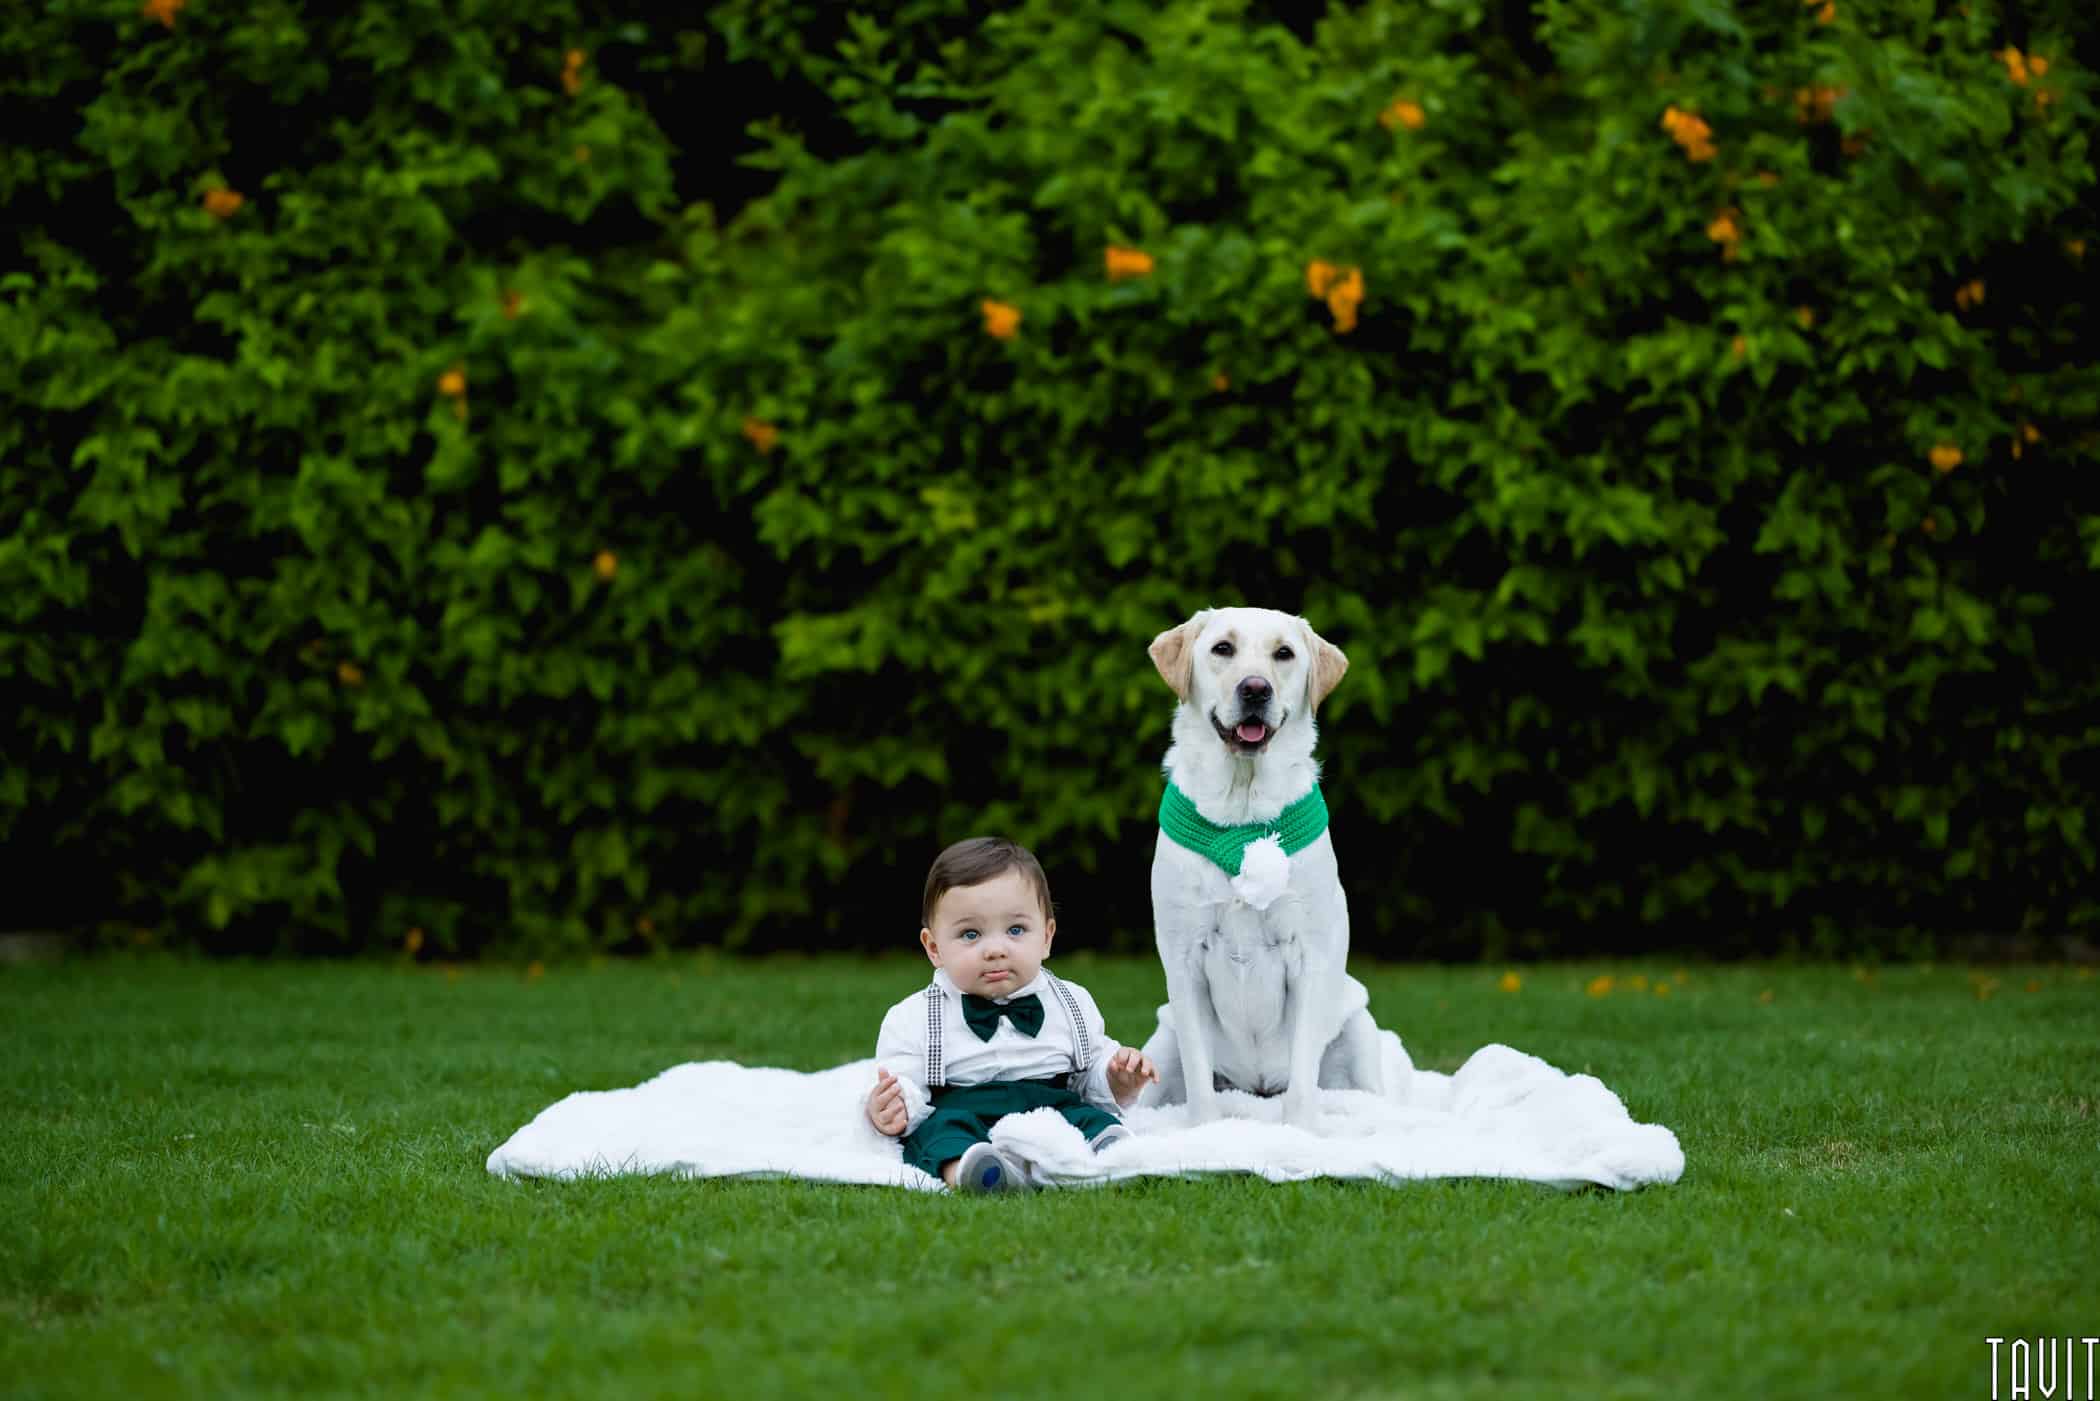 Baby and a dog sitting on blanket